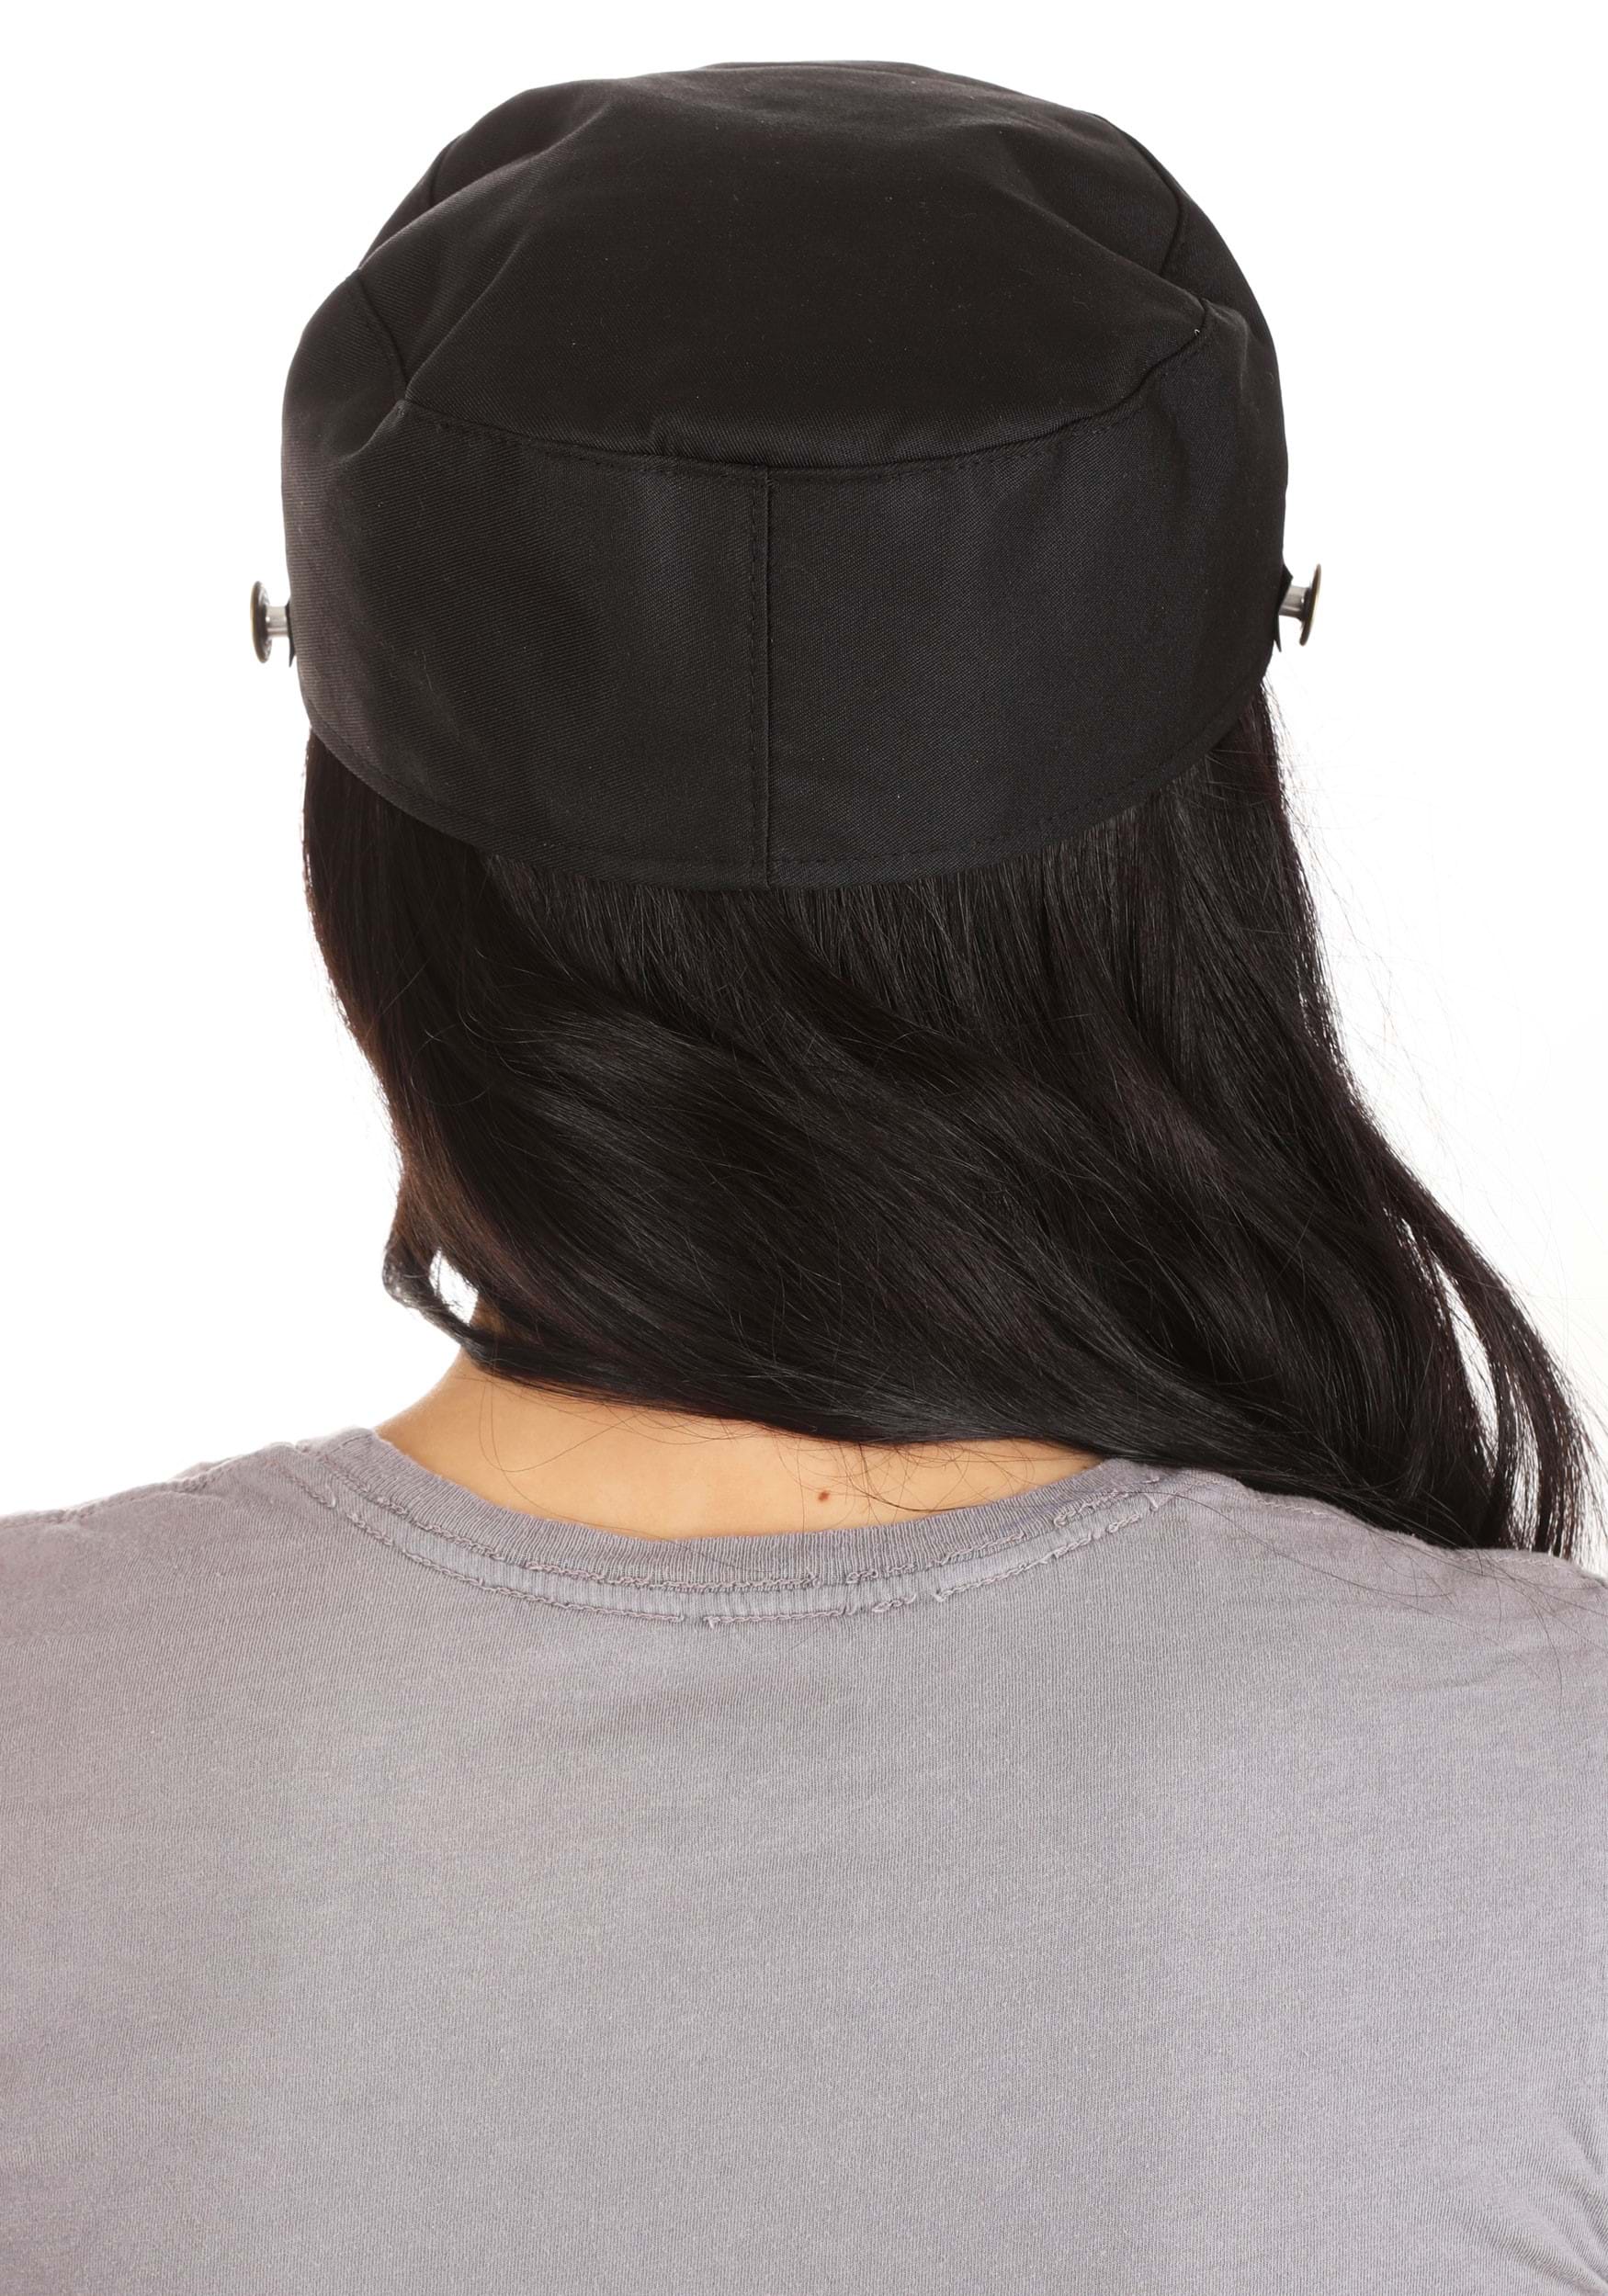 Coraline Hat For Adults